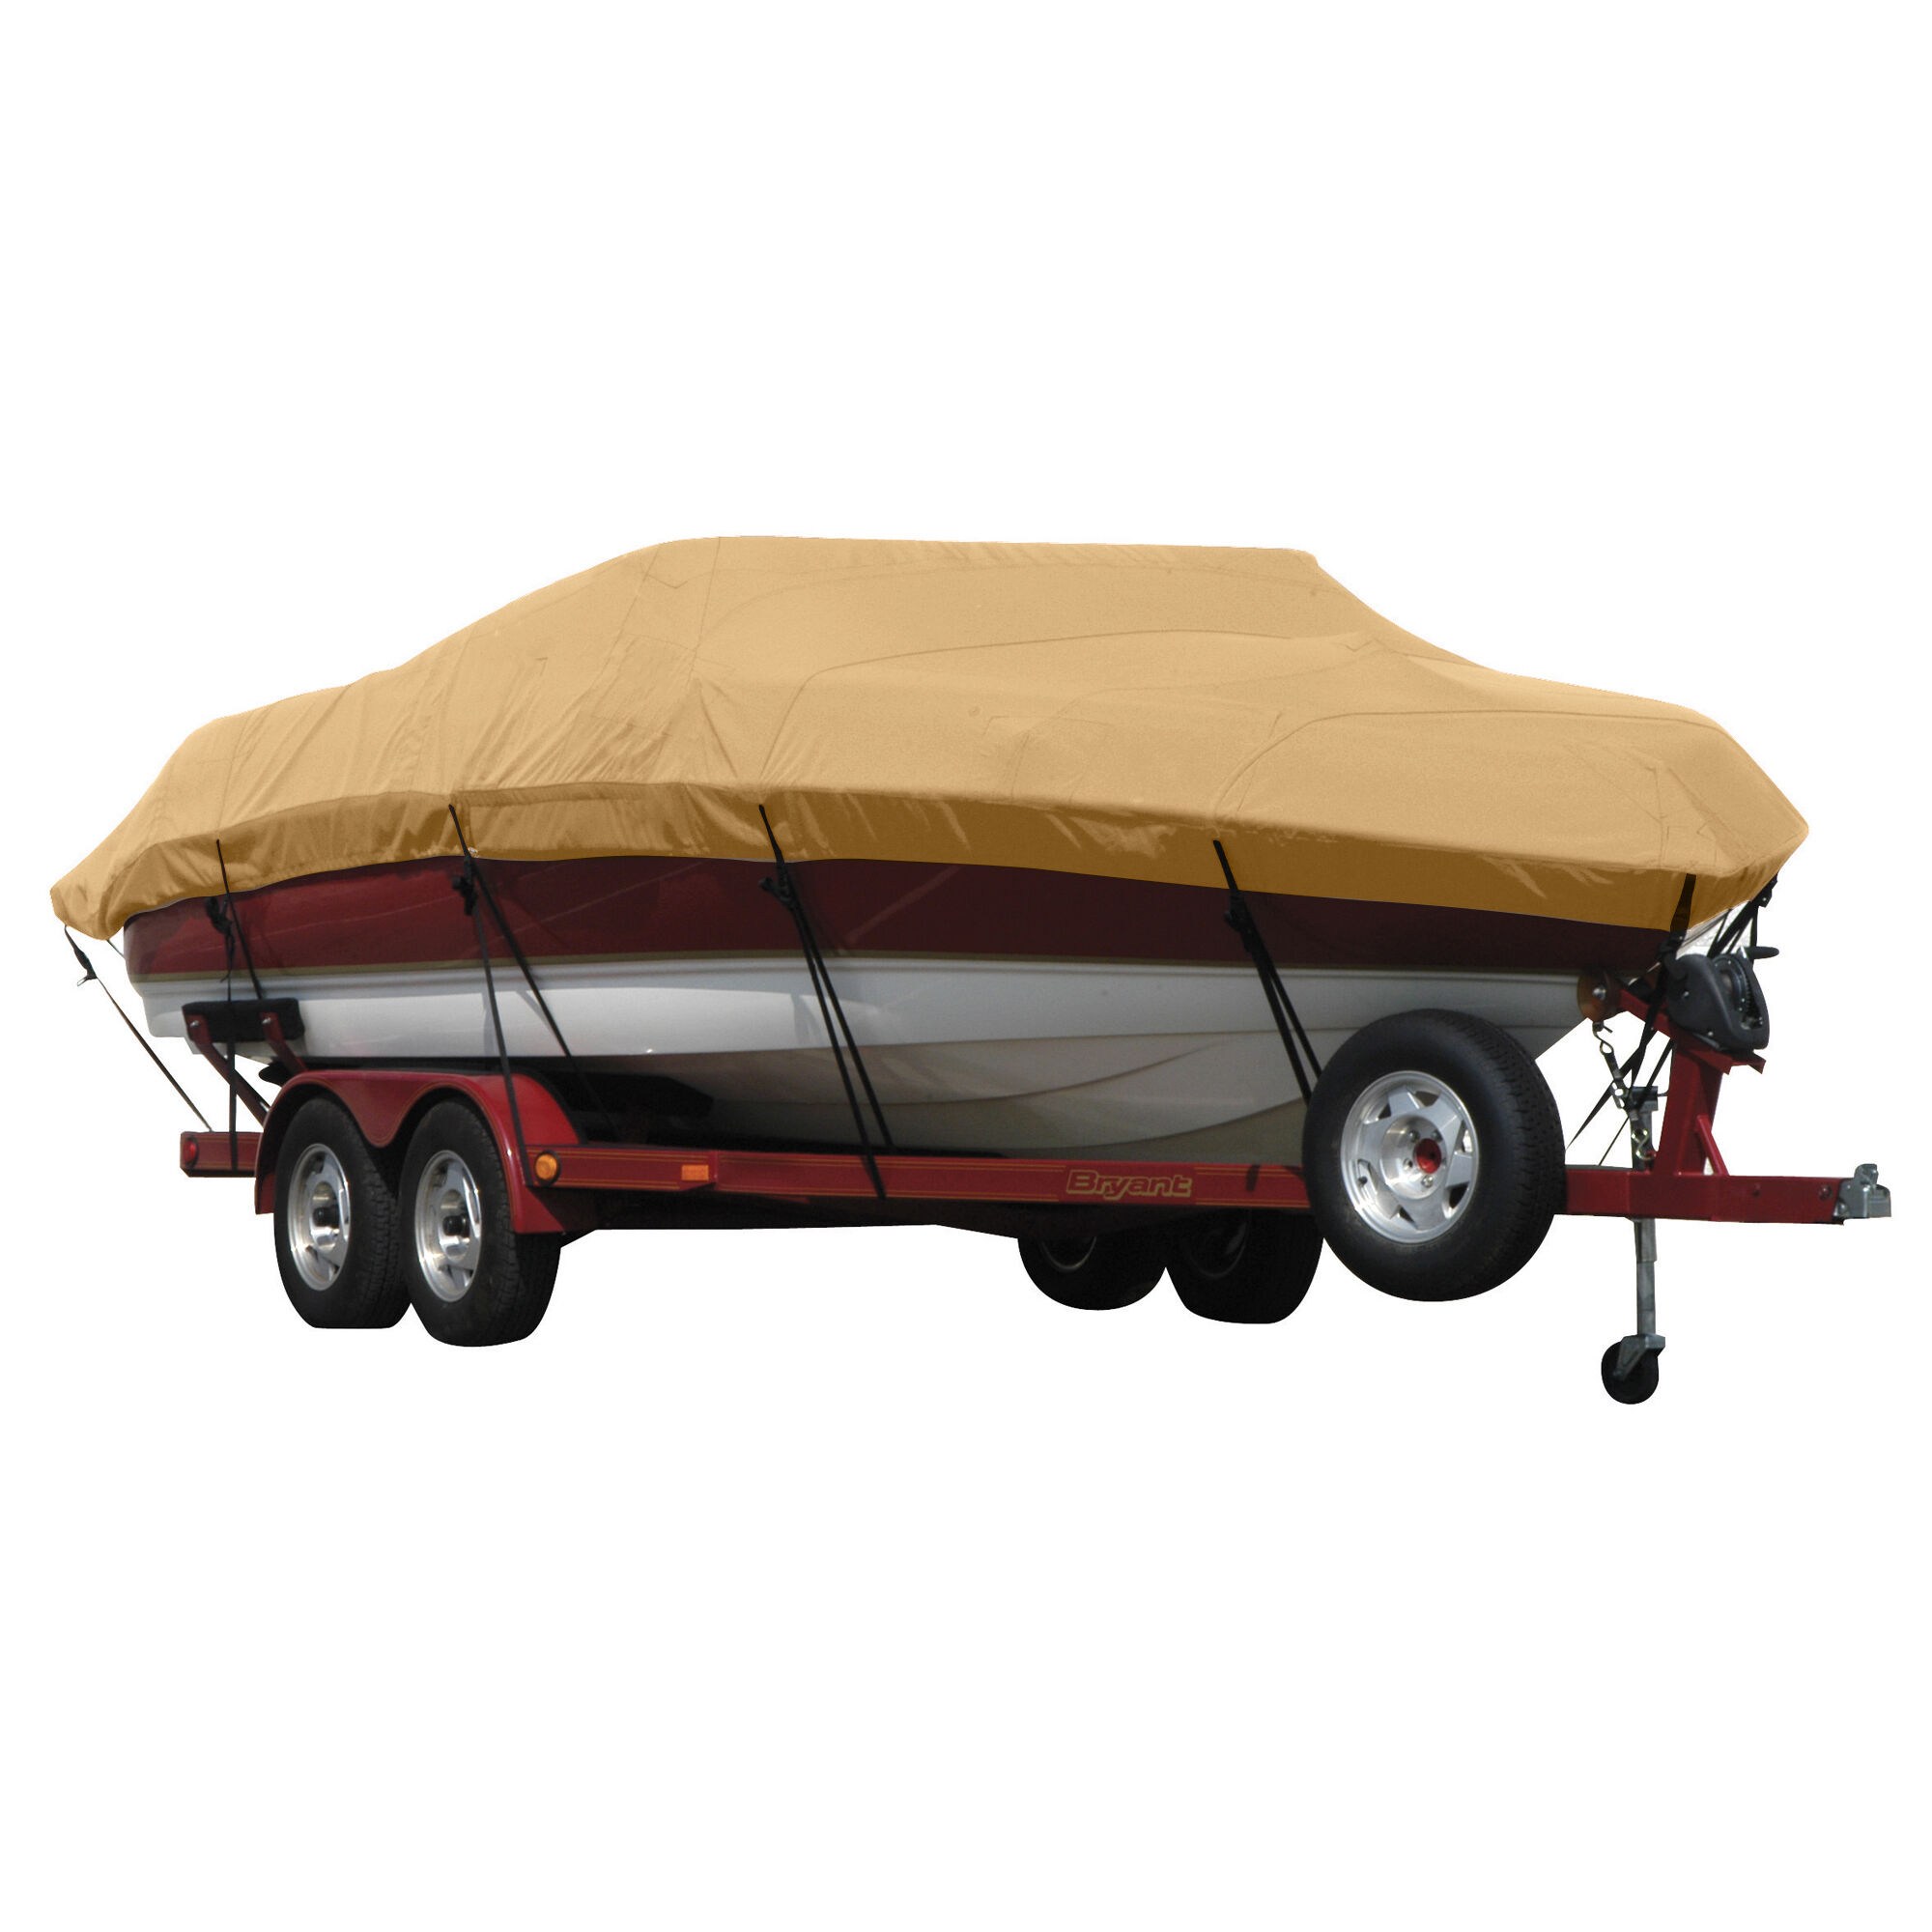 Covermate Exact Fit Sunbrella Boat Cover for Campion Chase 800 Chase 800 I/O. Toast